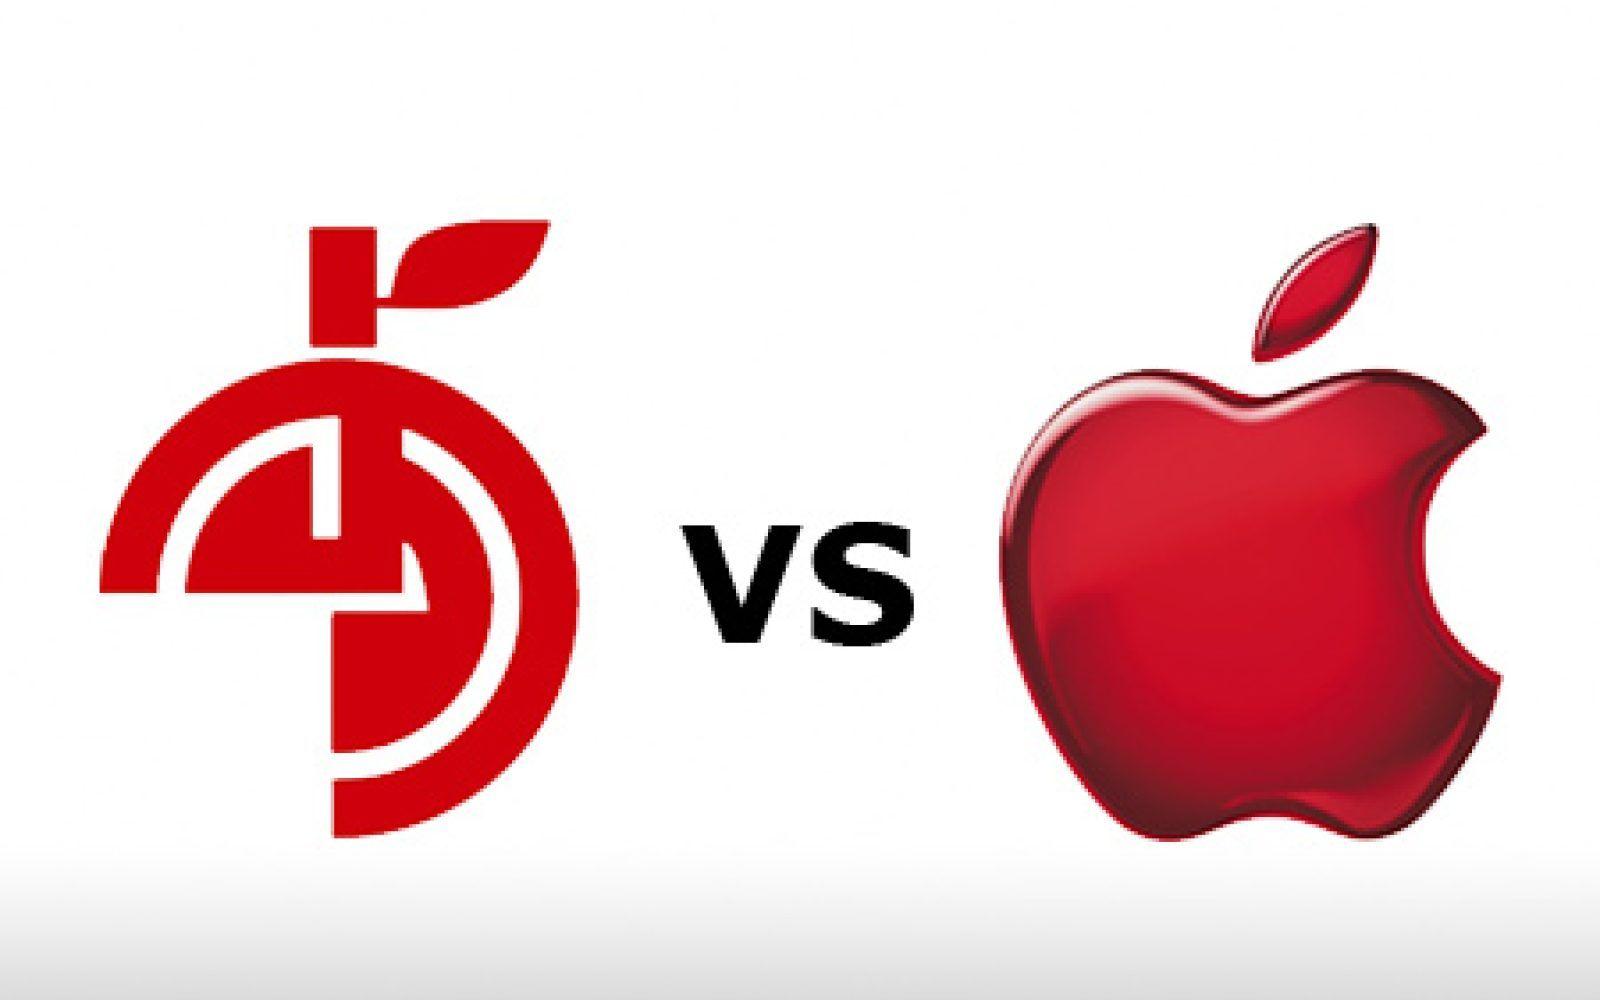 Chinese Phone Company Logo - Apple accuses Chinese food company of copying logo